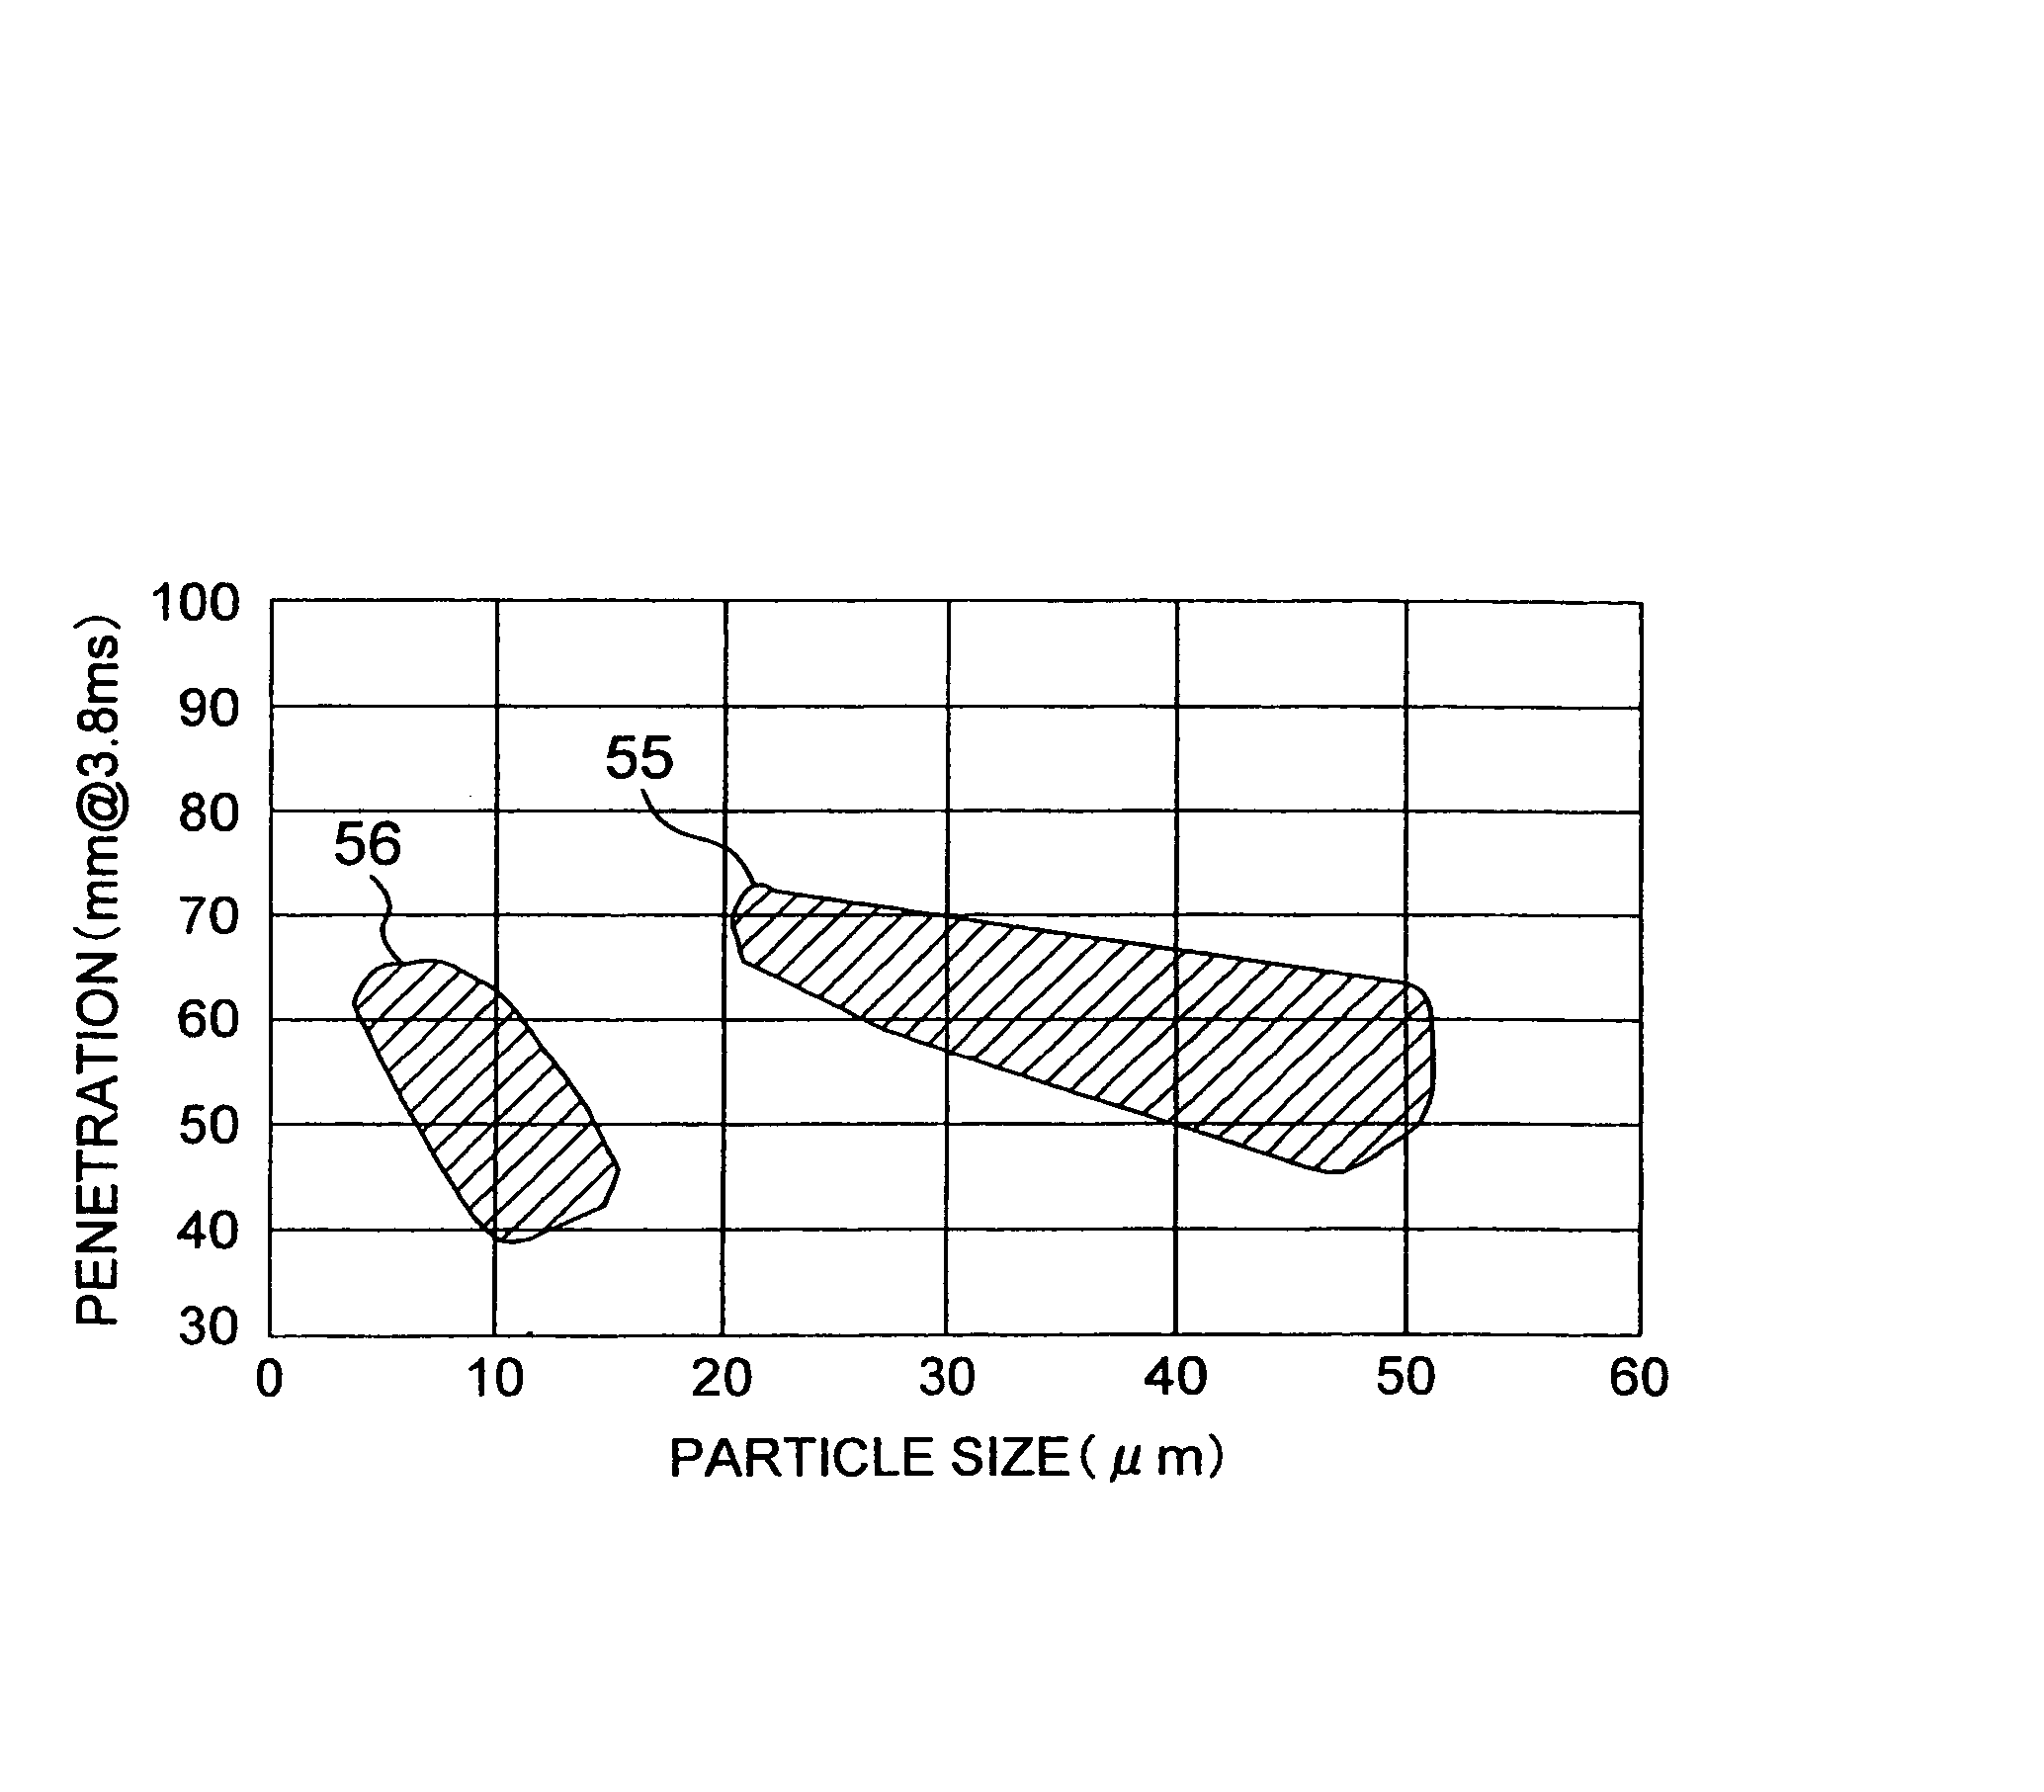 Cylinder injection type internal combustion engine, control method for internal combustion engine, and fuel injection valve